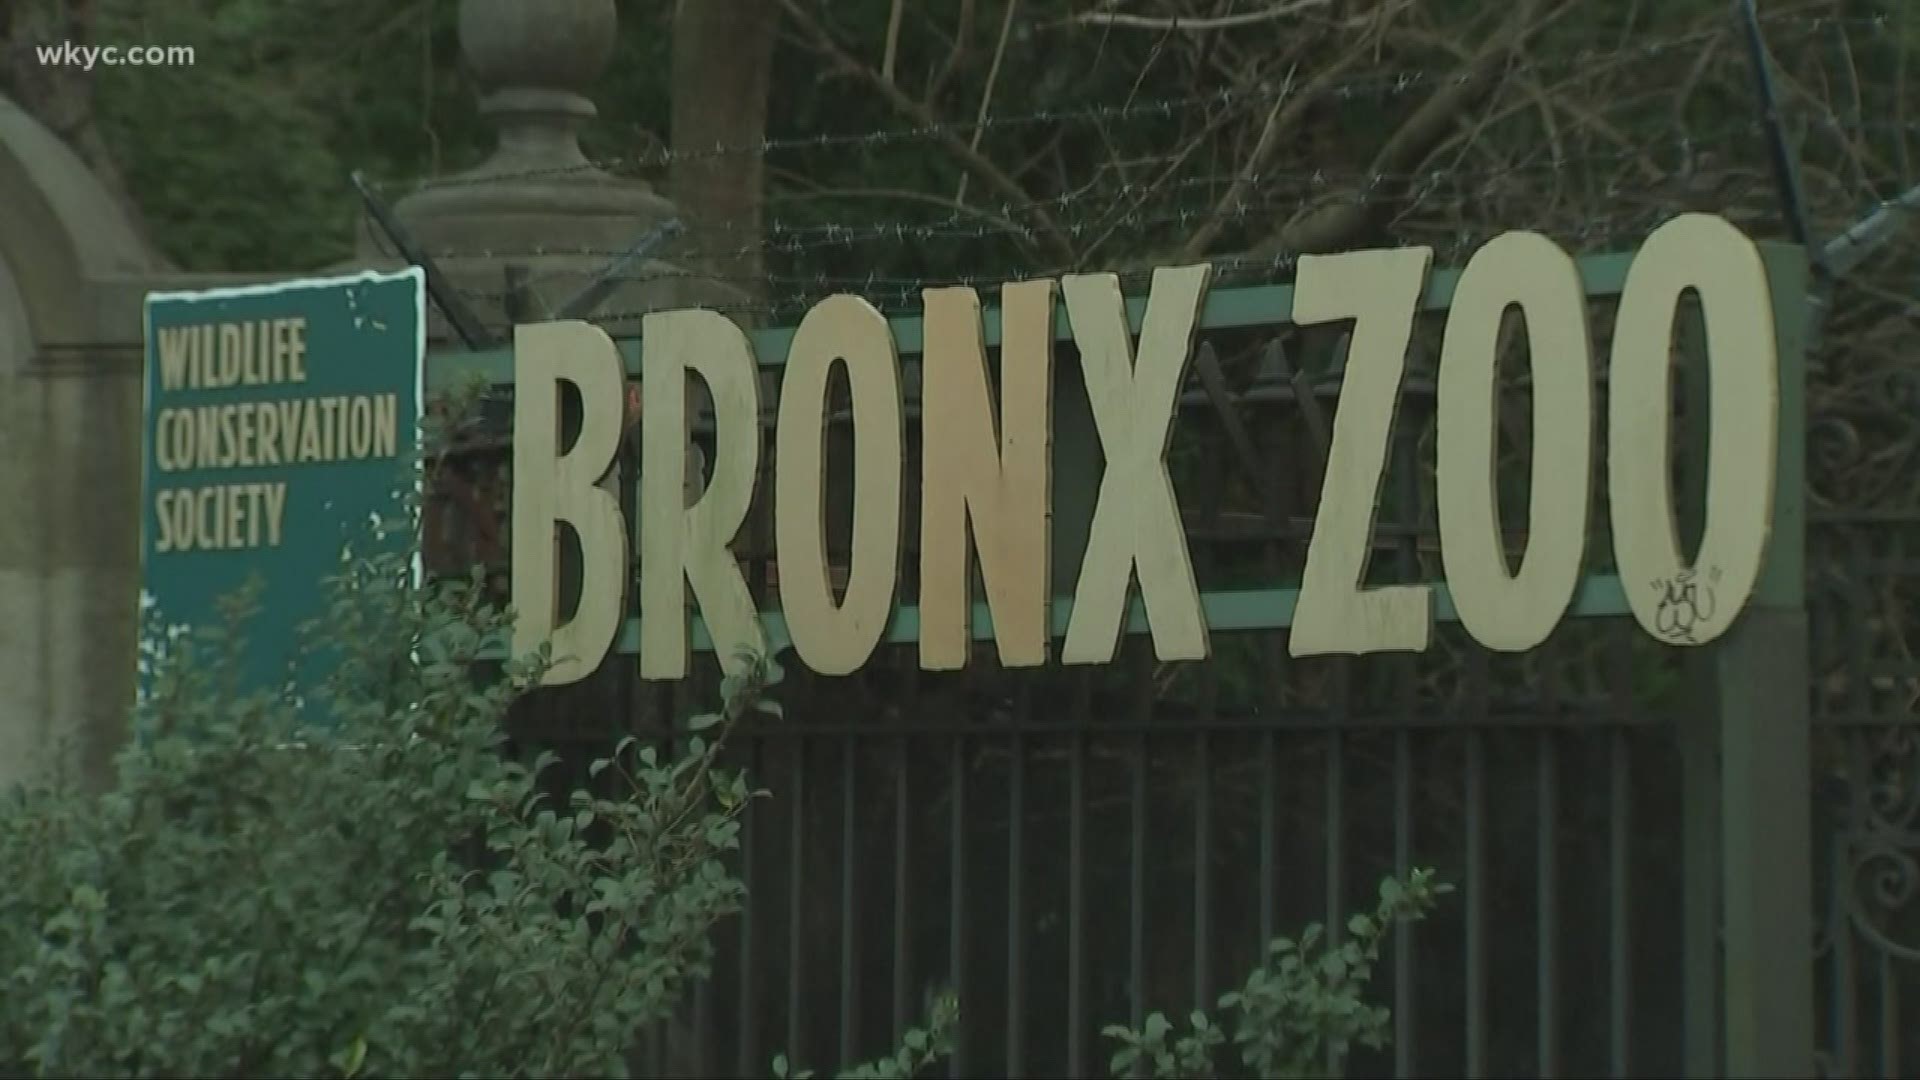 A 4-year-old tiger at the Bronx Zoo tested positive for COVID-19 over the weekend. Staff say it was likely through a handler who had no symptoms of the disease.